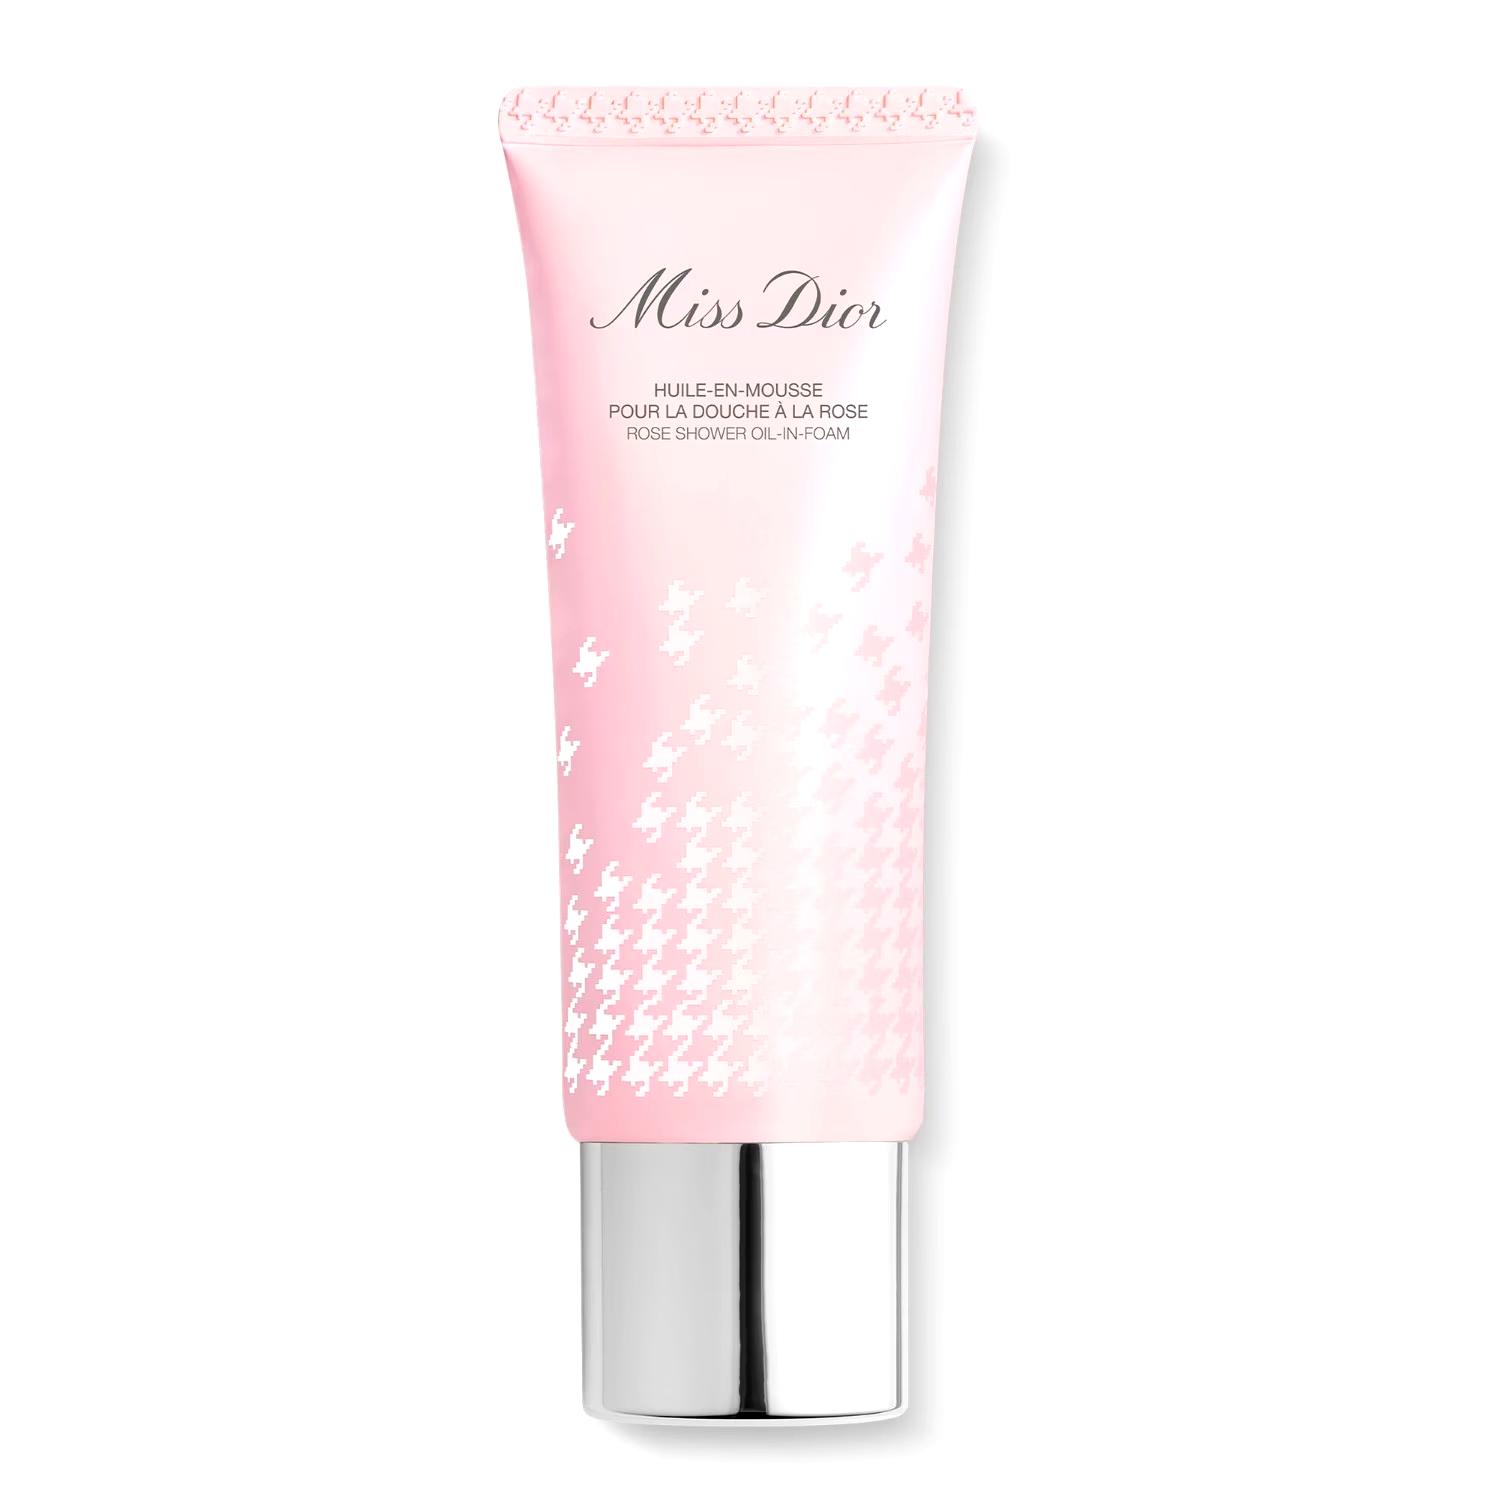 Miss Dior Rose Shower Oil-in-Foam cleans and donates moisture